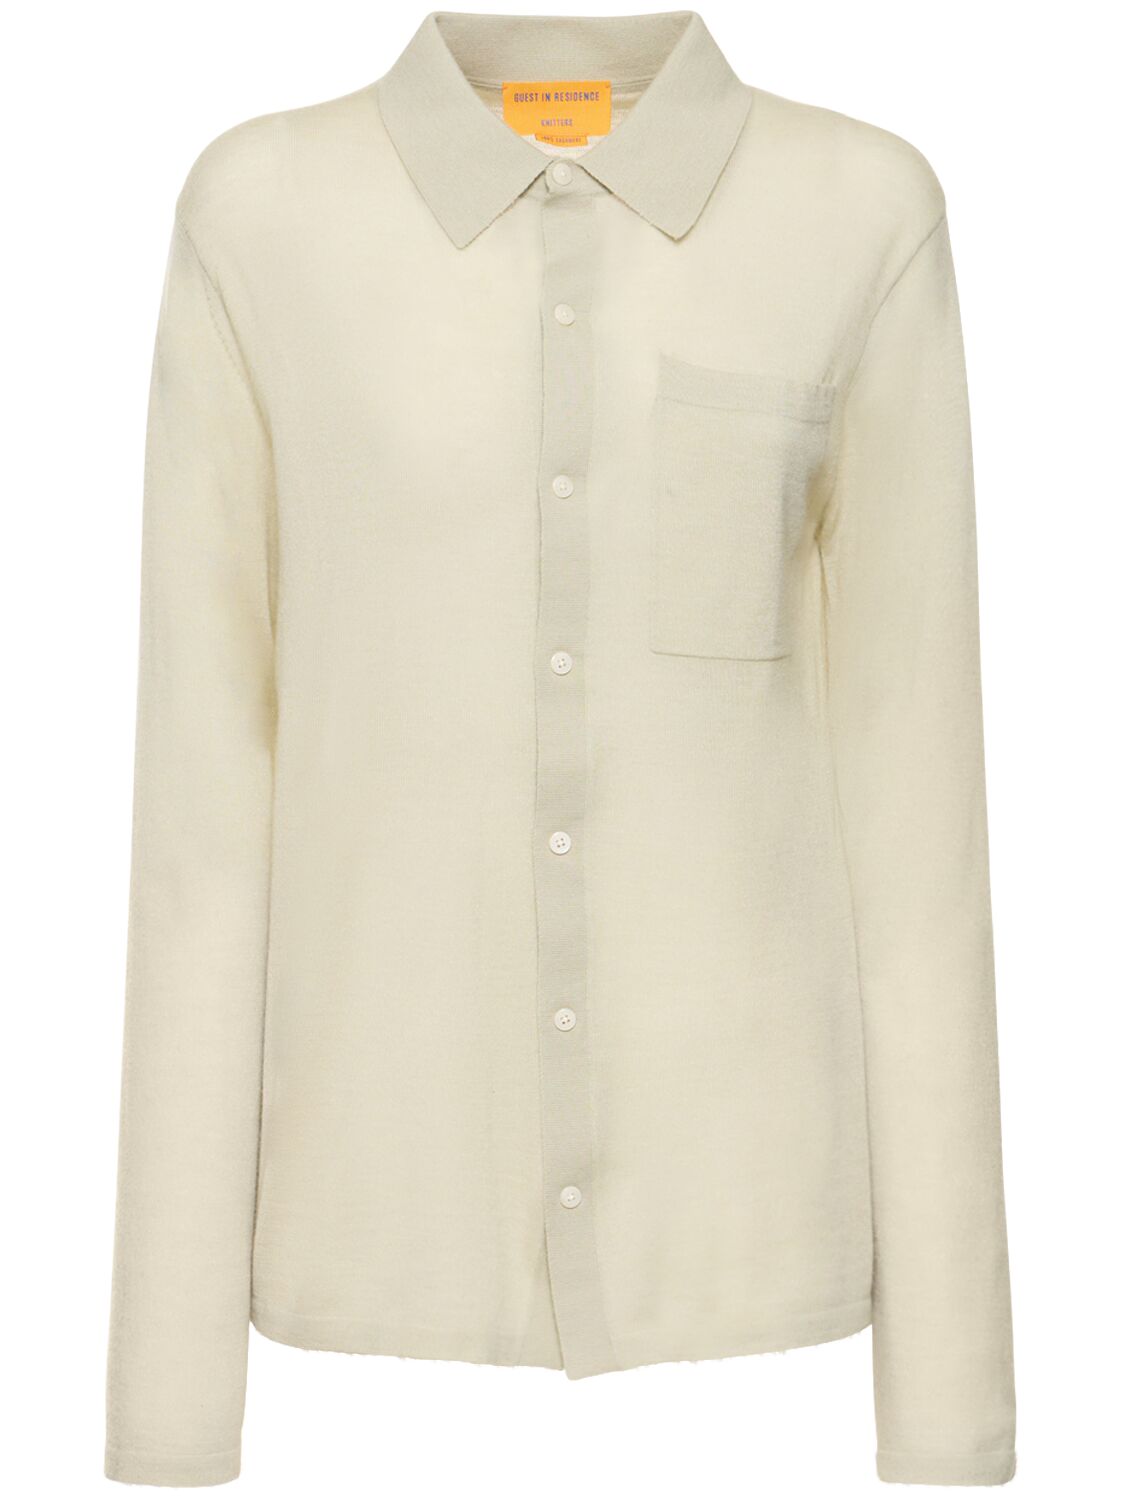 Image of Lvr Exclusive Showtime Cashmere Shirt